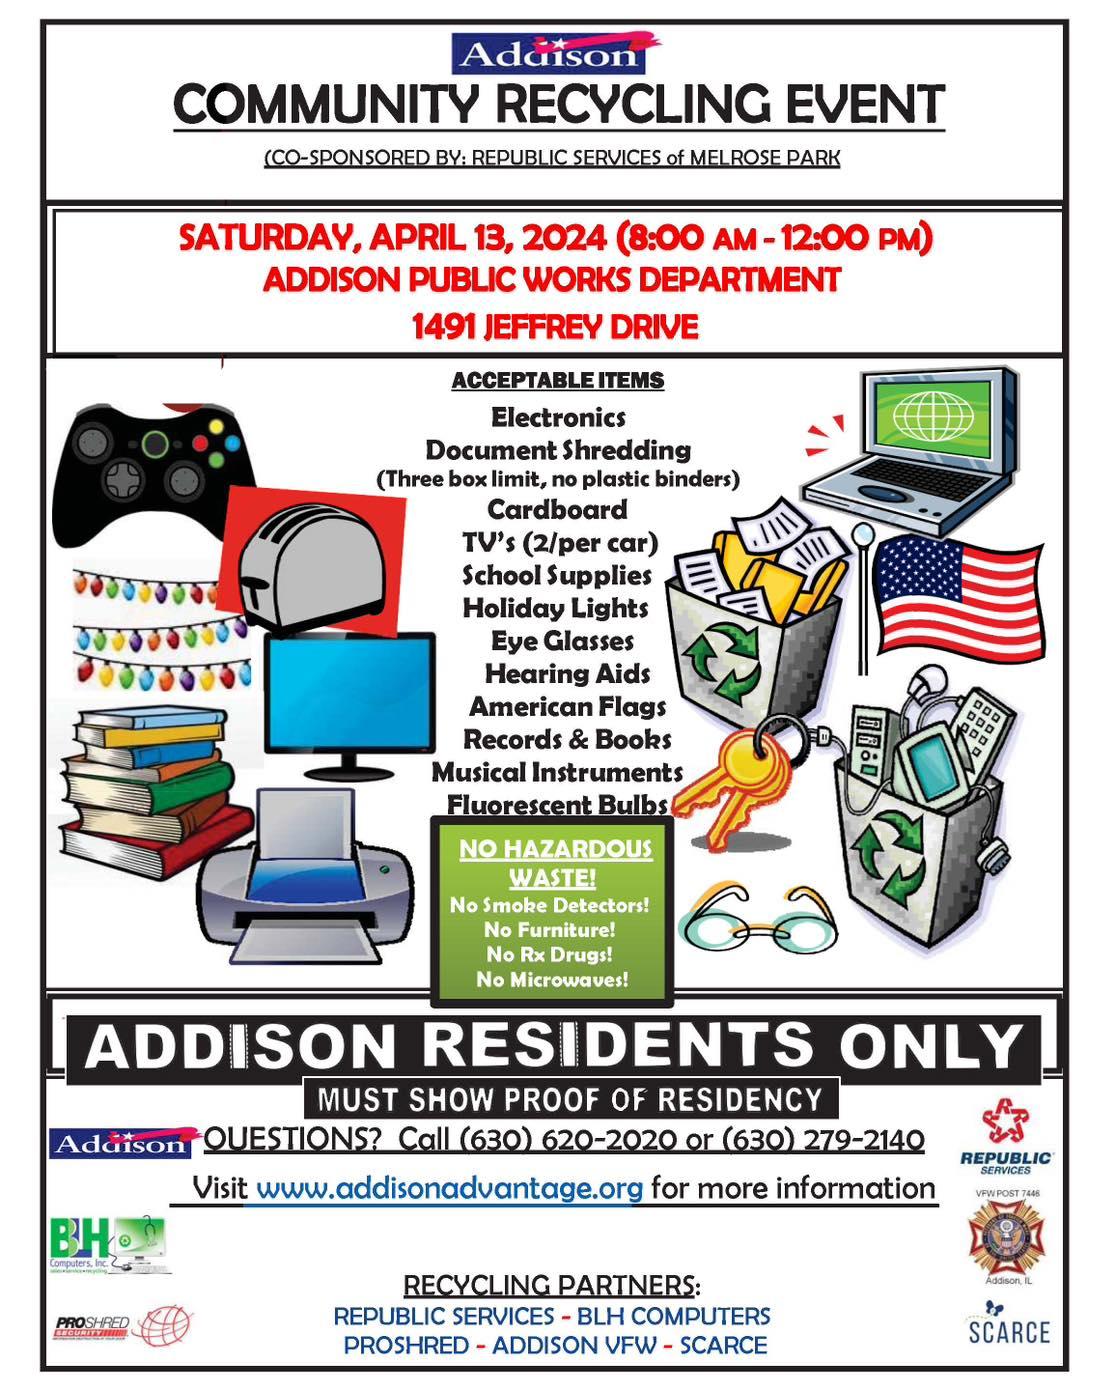 Village of Addison to host Community Recycling Event for residents